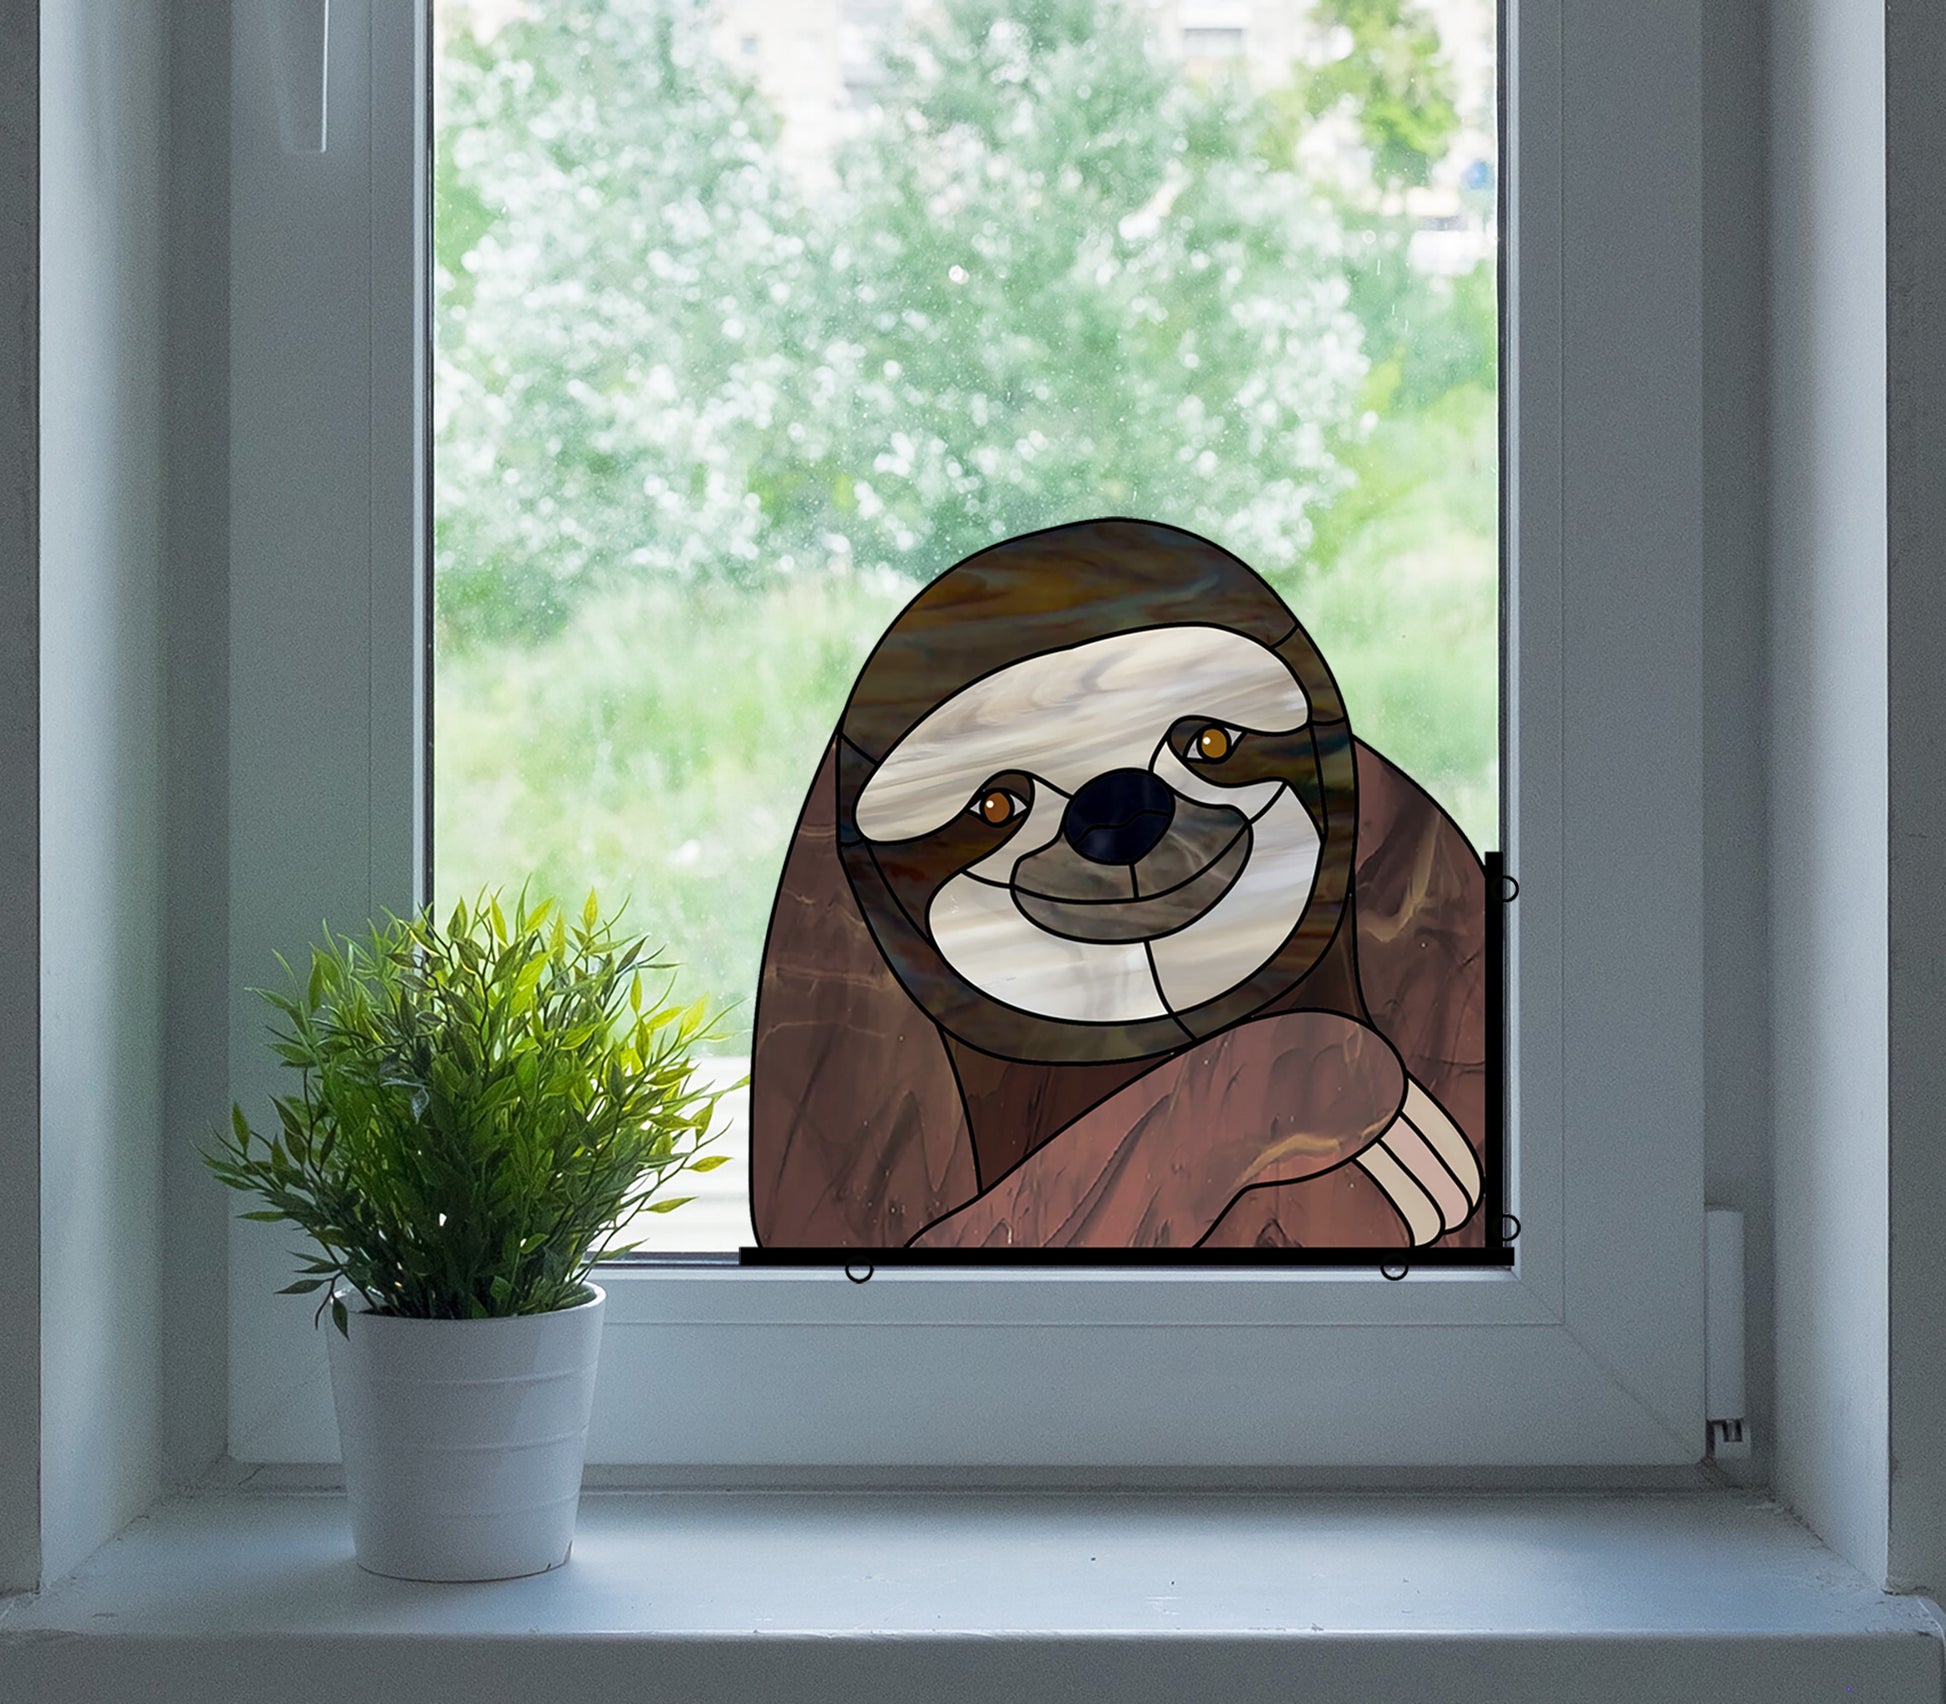 Stained glass pattern for a sloth peeking in the window, instant PDF download, shown in a window with a plant